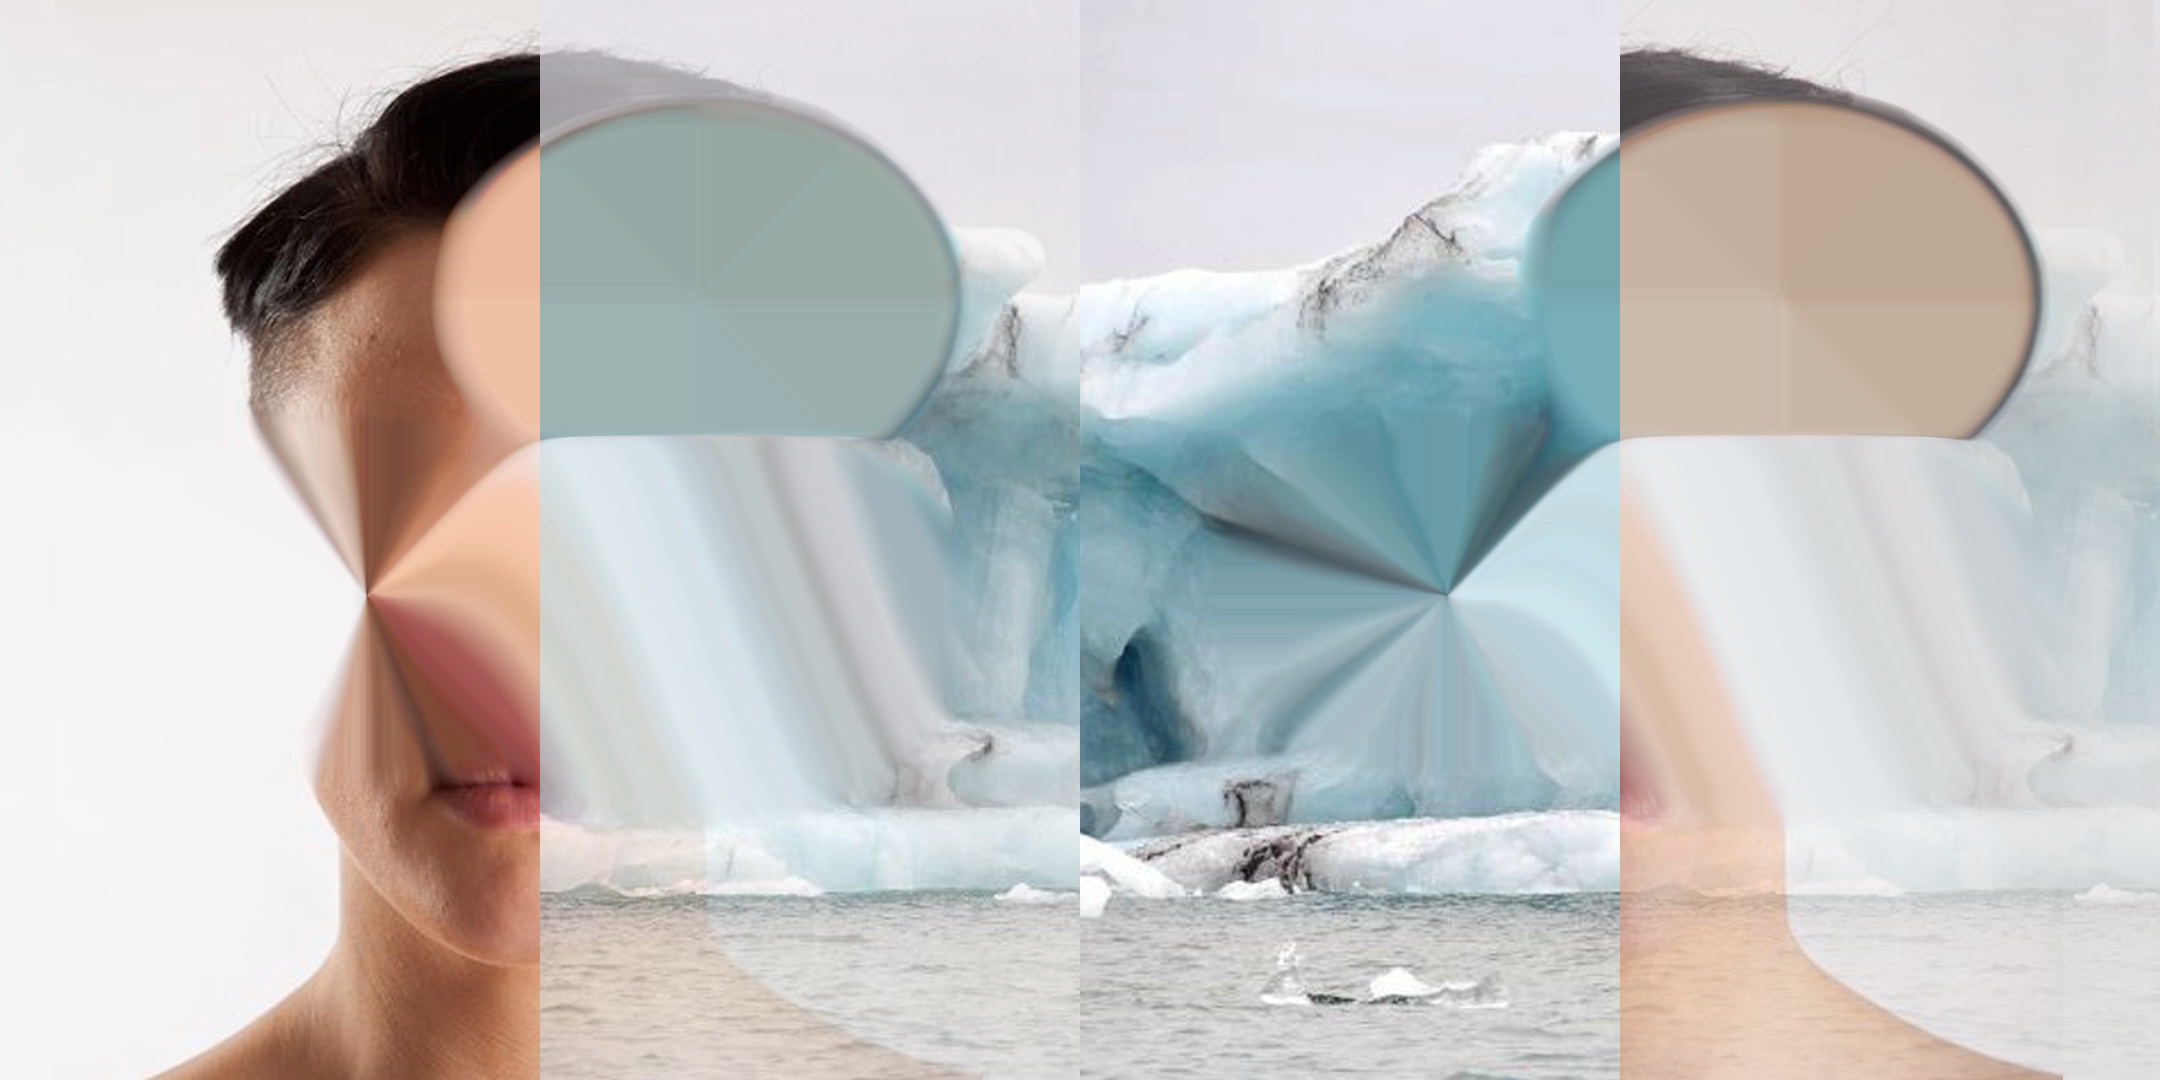 Video still from Becoming Illegible (expanding) showing a woman's face that has been blown up until it becomes a flat circle, and a glacier image treated the same way.